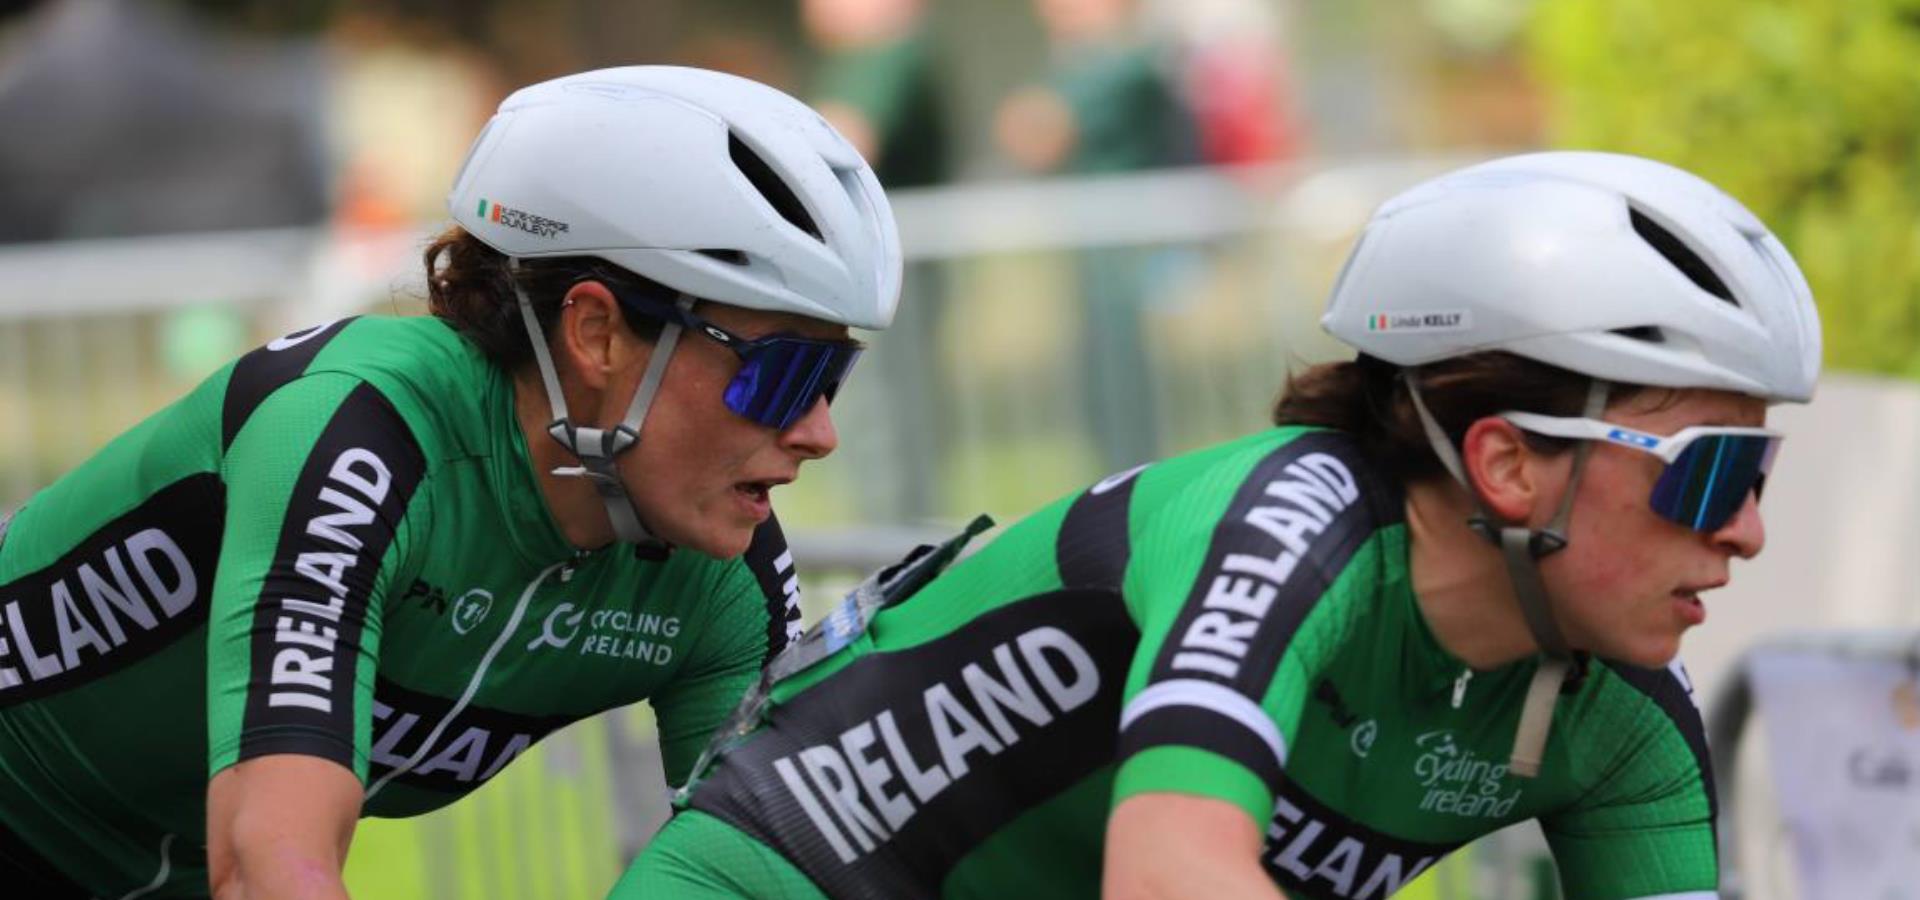 Two cyclists from the Irish Team